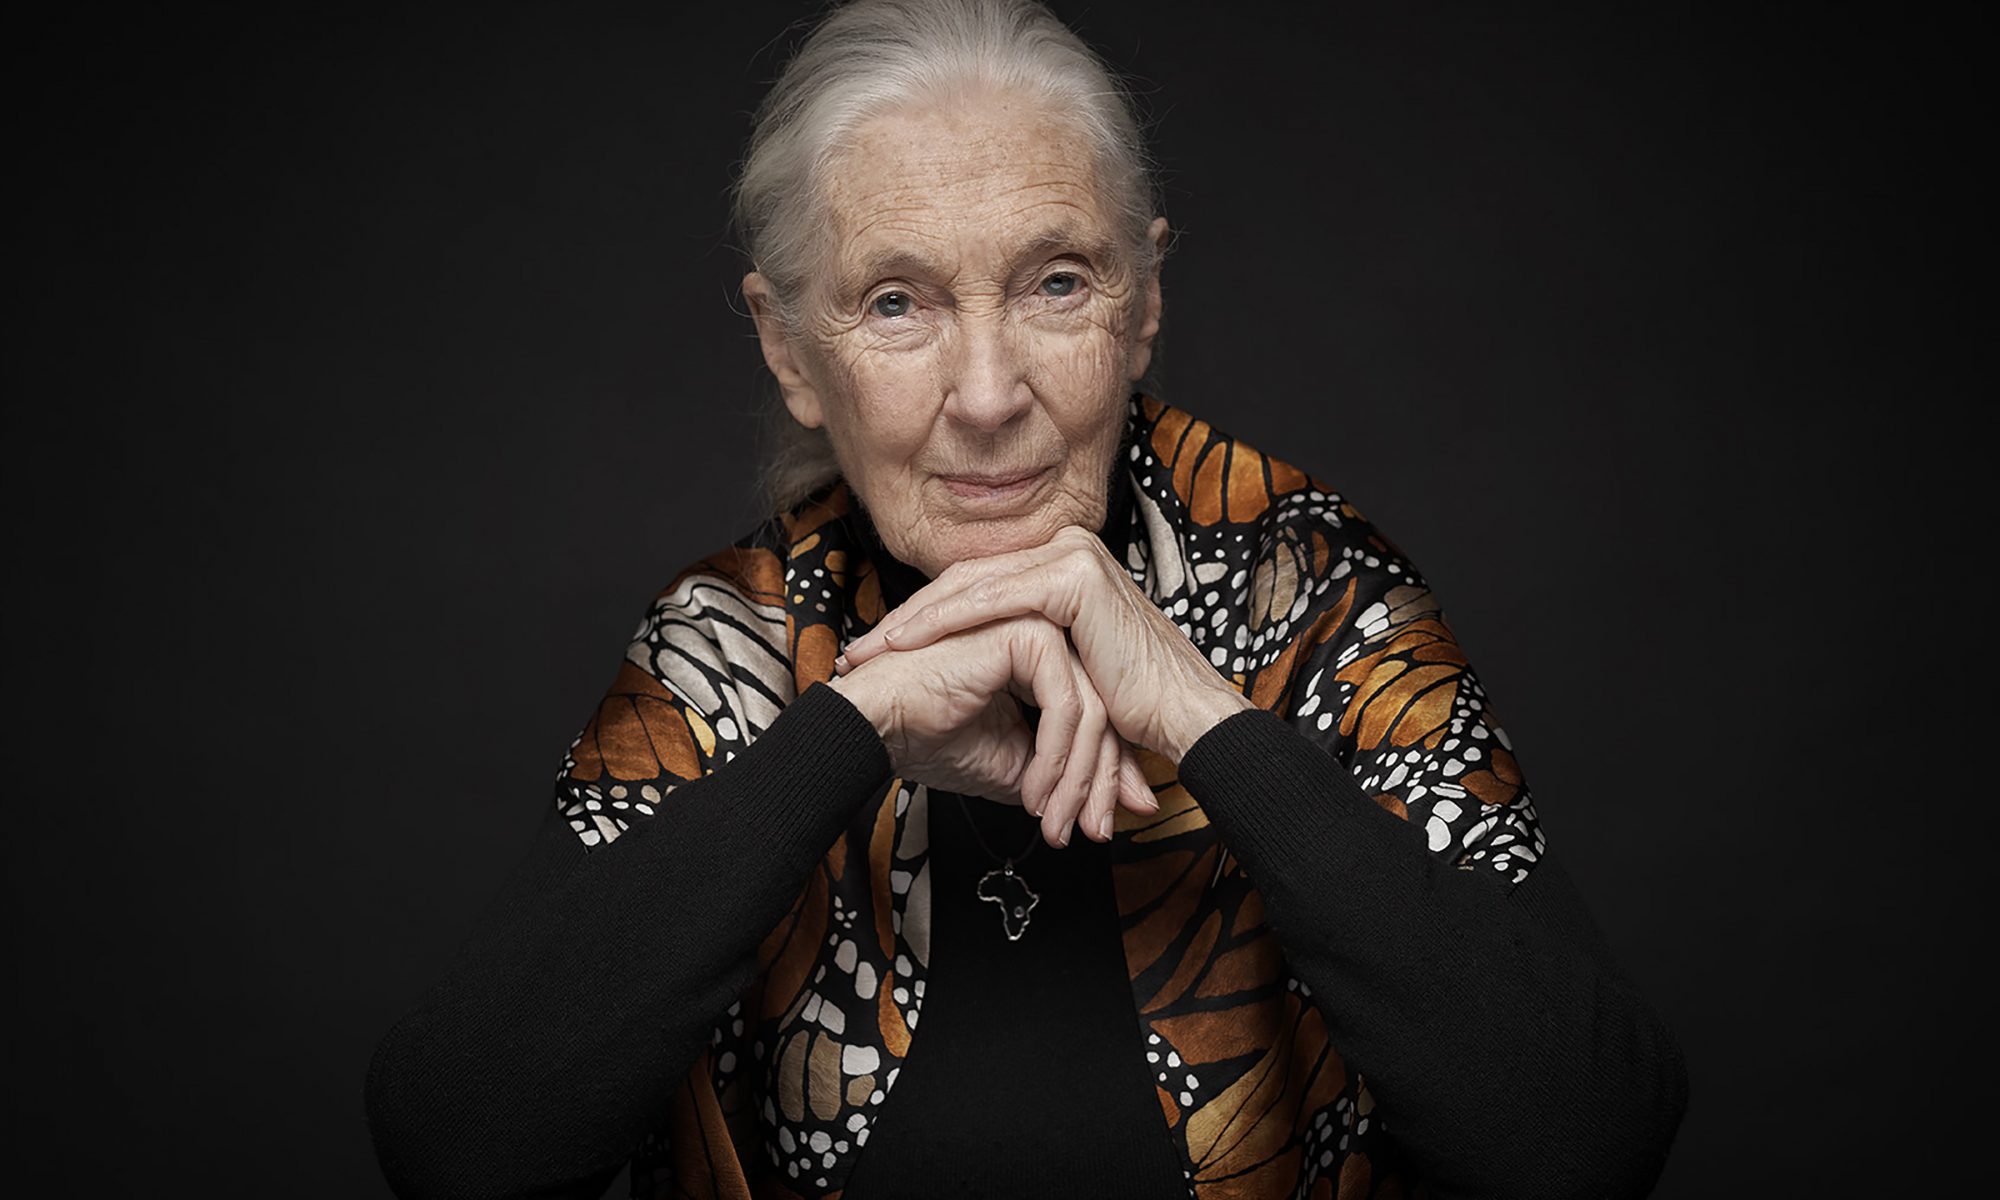 Dr. Jane Goodall in a black sweater and monarch butterfly shoulder scarf against a black background.